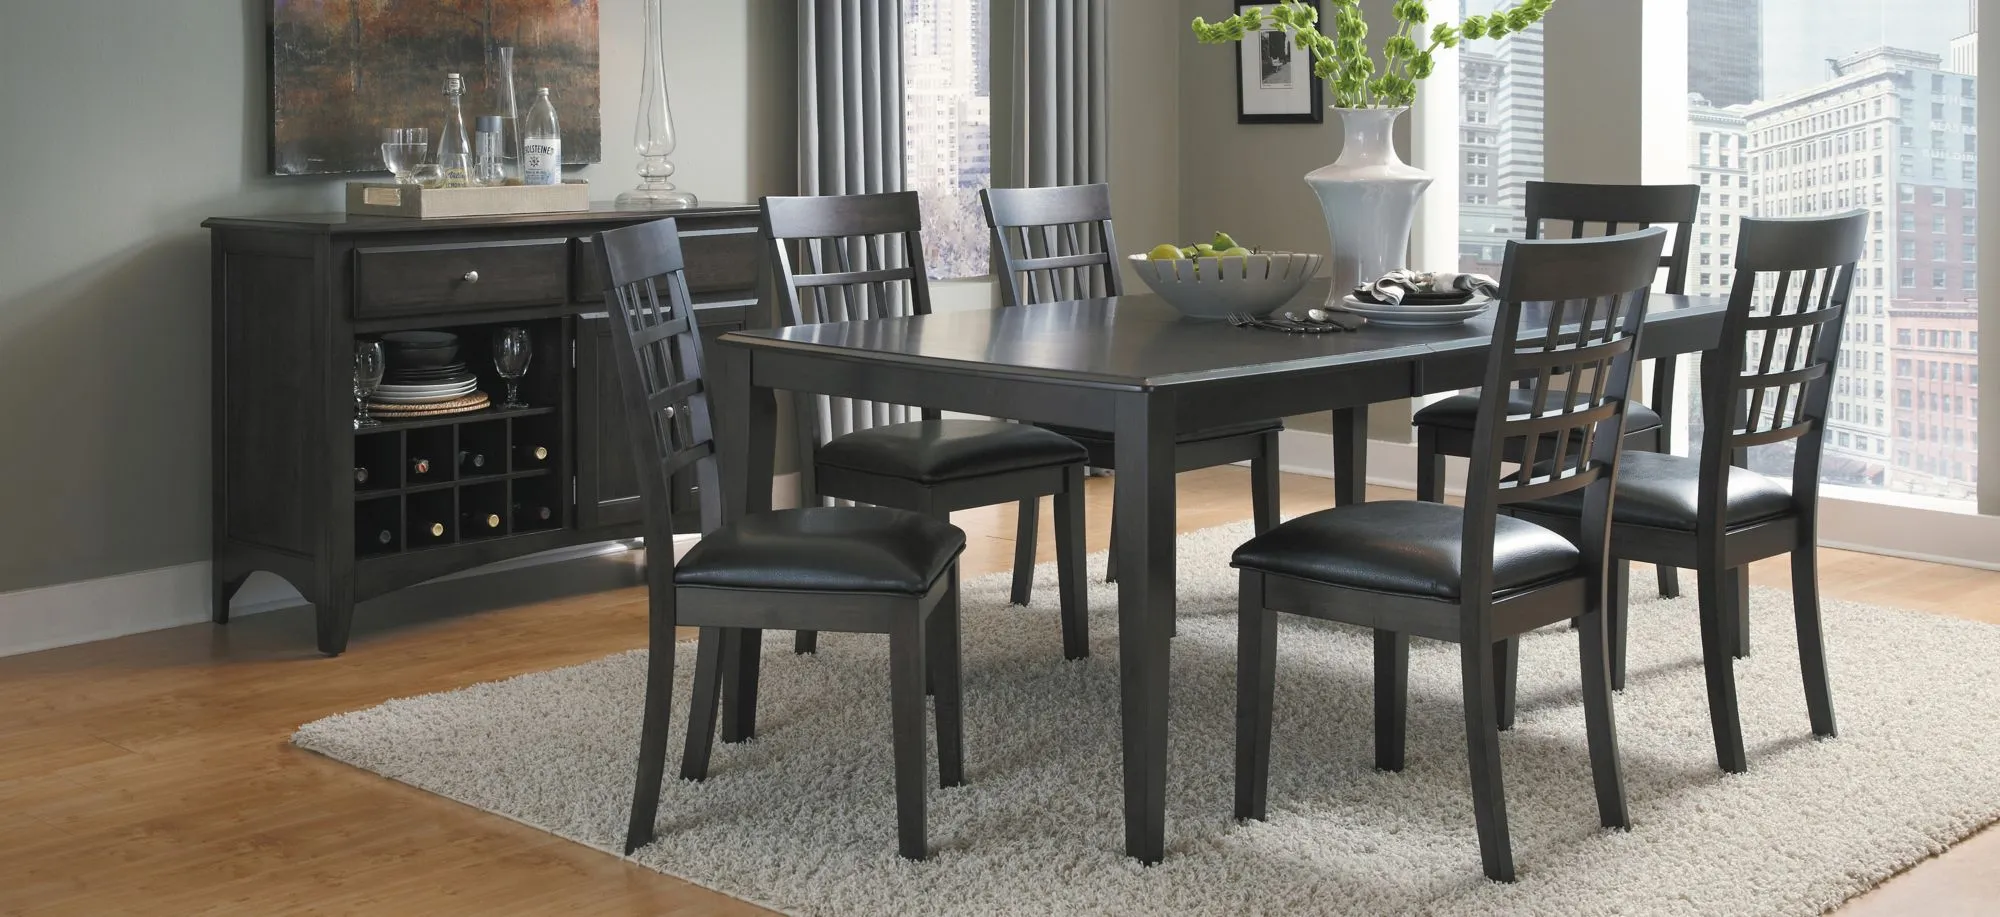 A-America Bristol Point Dining Table w/ Butterfly Leaf in Warm Grey by A-America